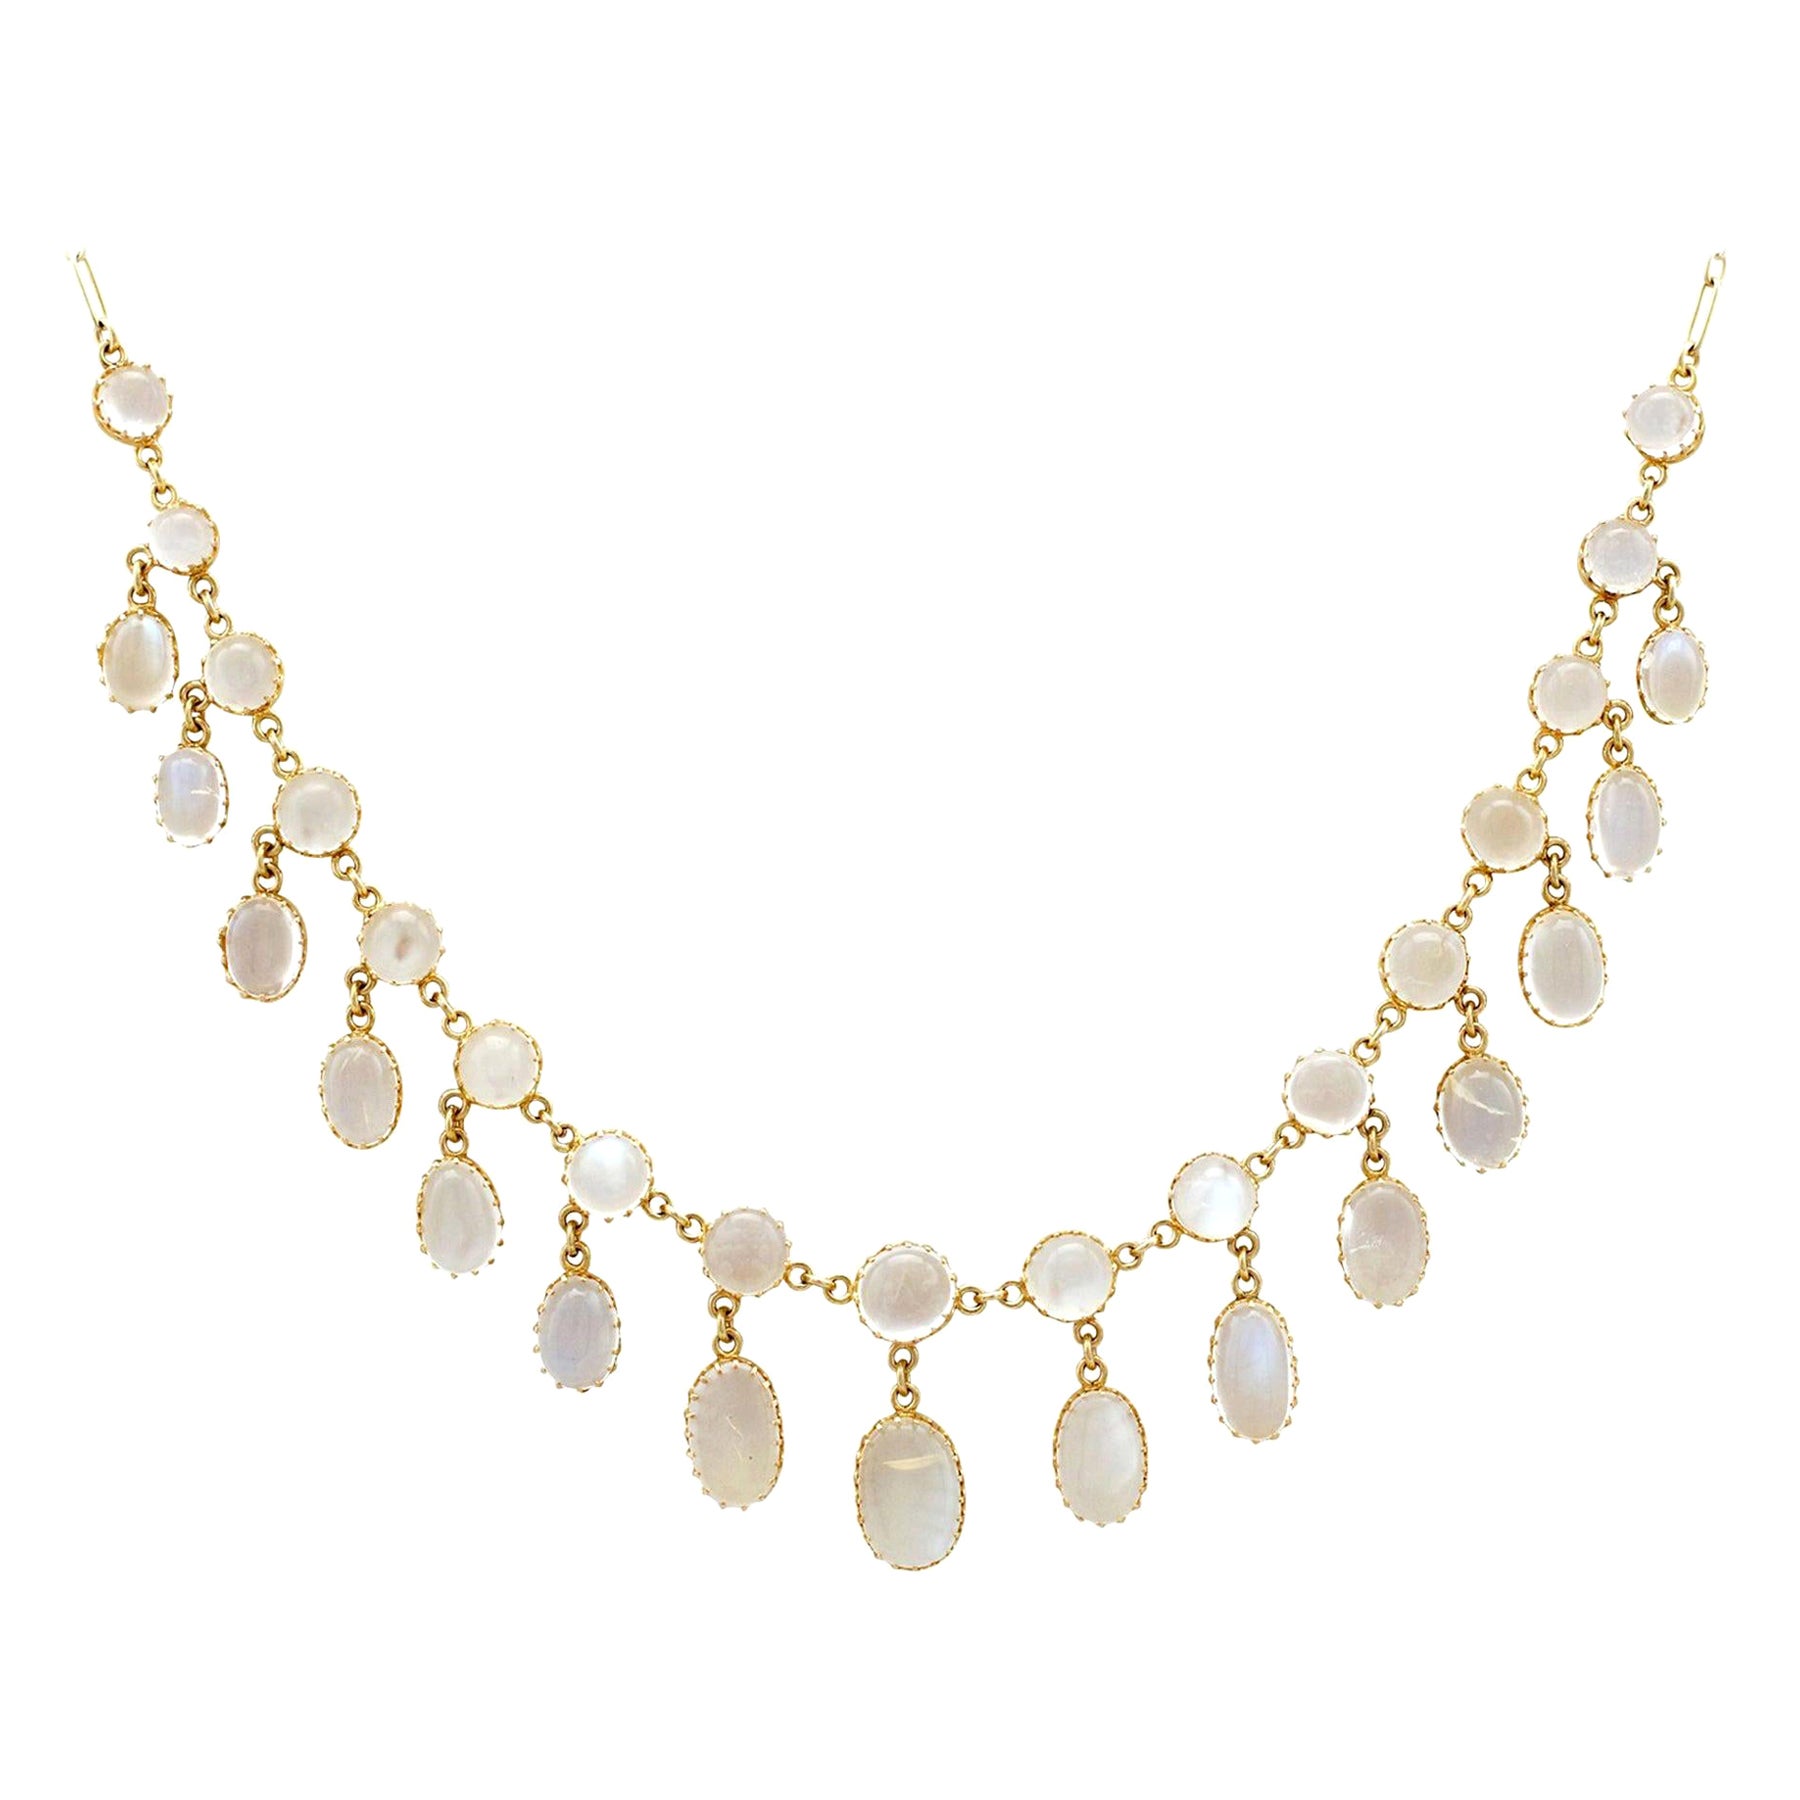 Antique 1900s 42.20 Carat Moonstone and Yellow Gold Necklace